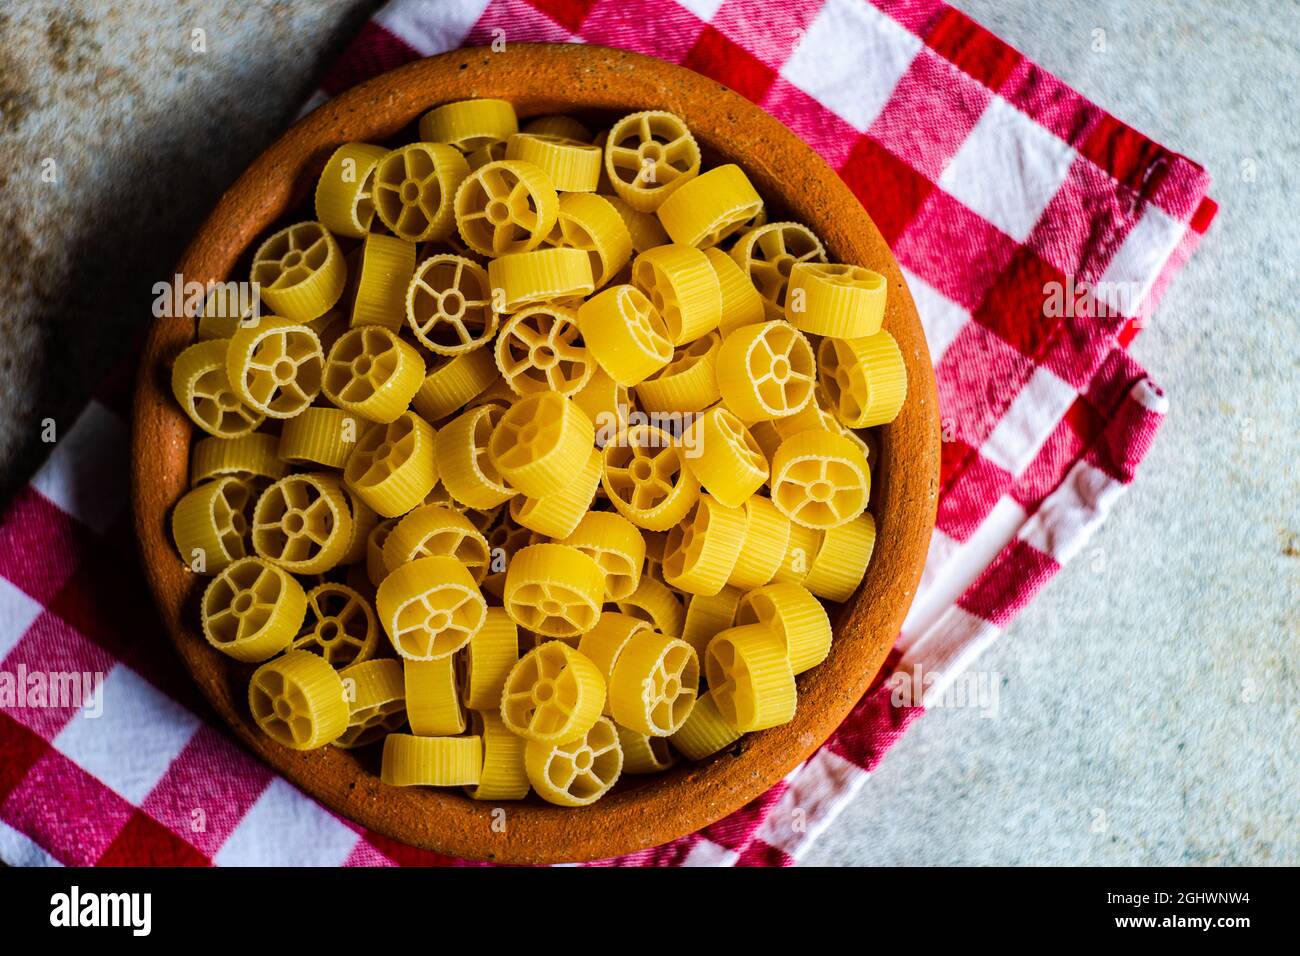 Overhead view of a bowl of ruote pasta on a folded napkin Stock Photo